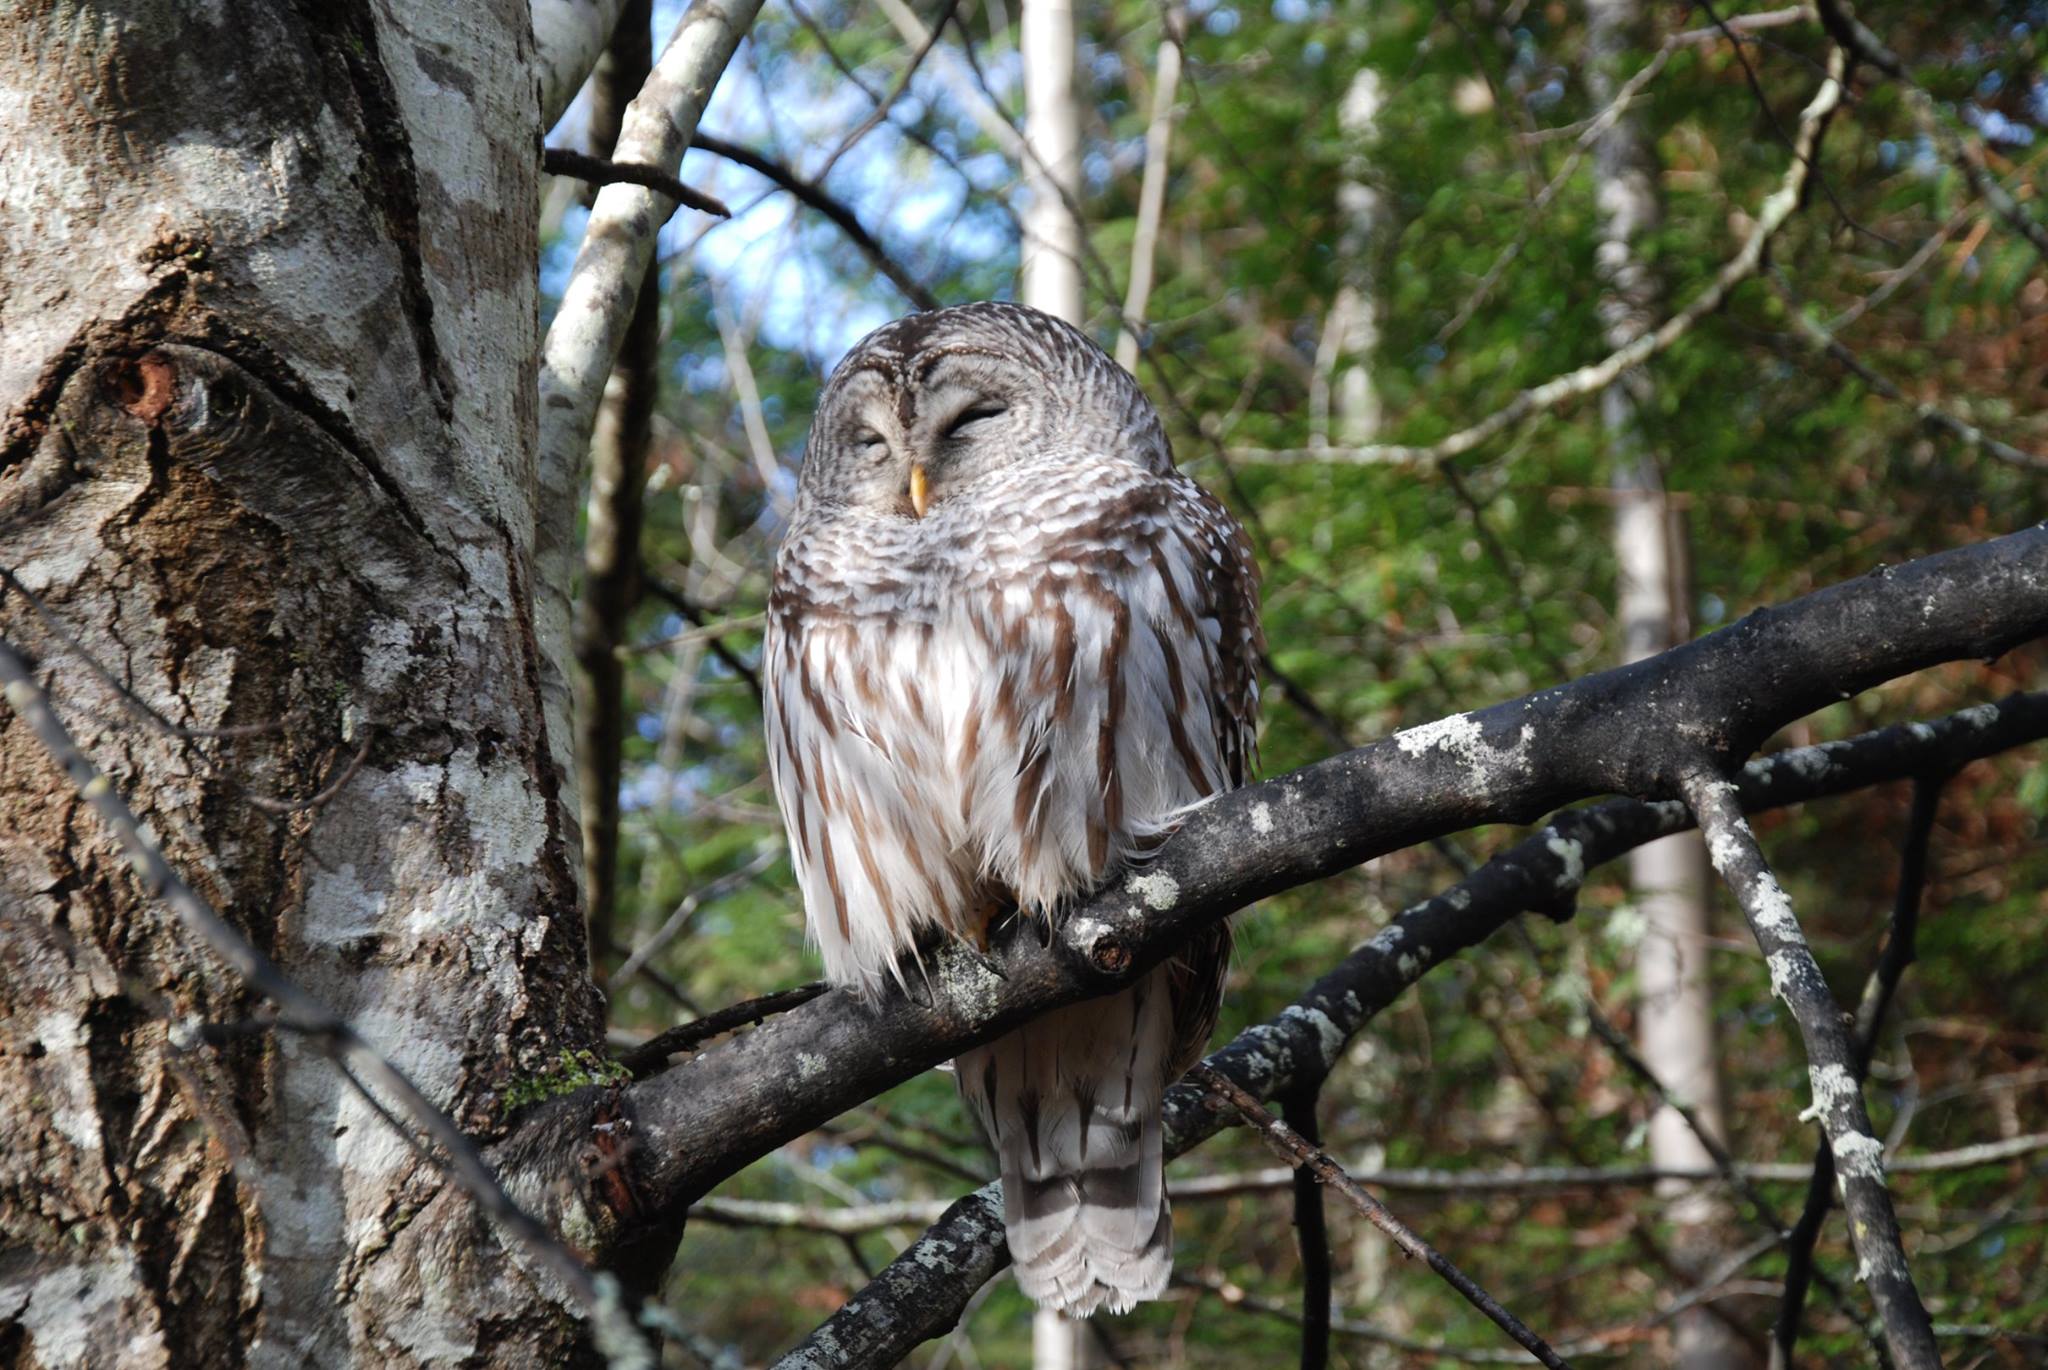 A large adult Barred Owl sits perched in a tree watching for its prey. This owl's head is round, and body is large and stout. Its plumage is silvery-white.